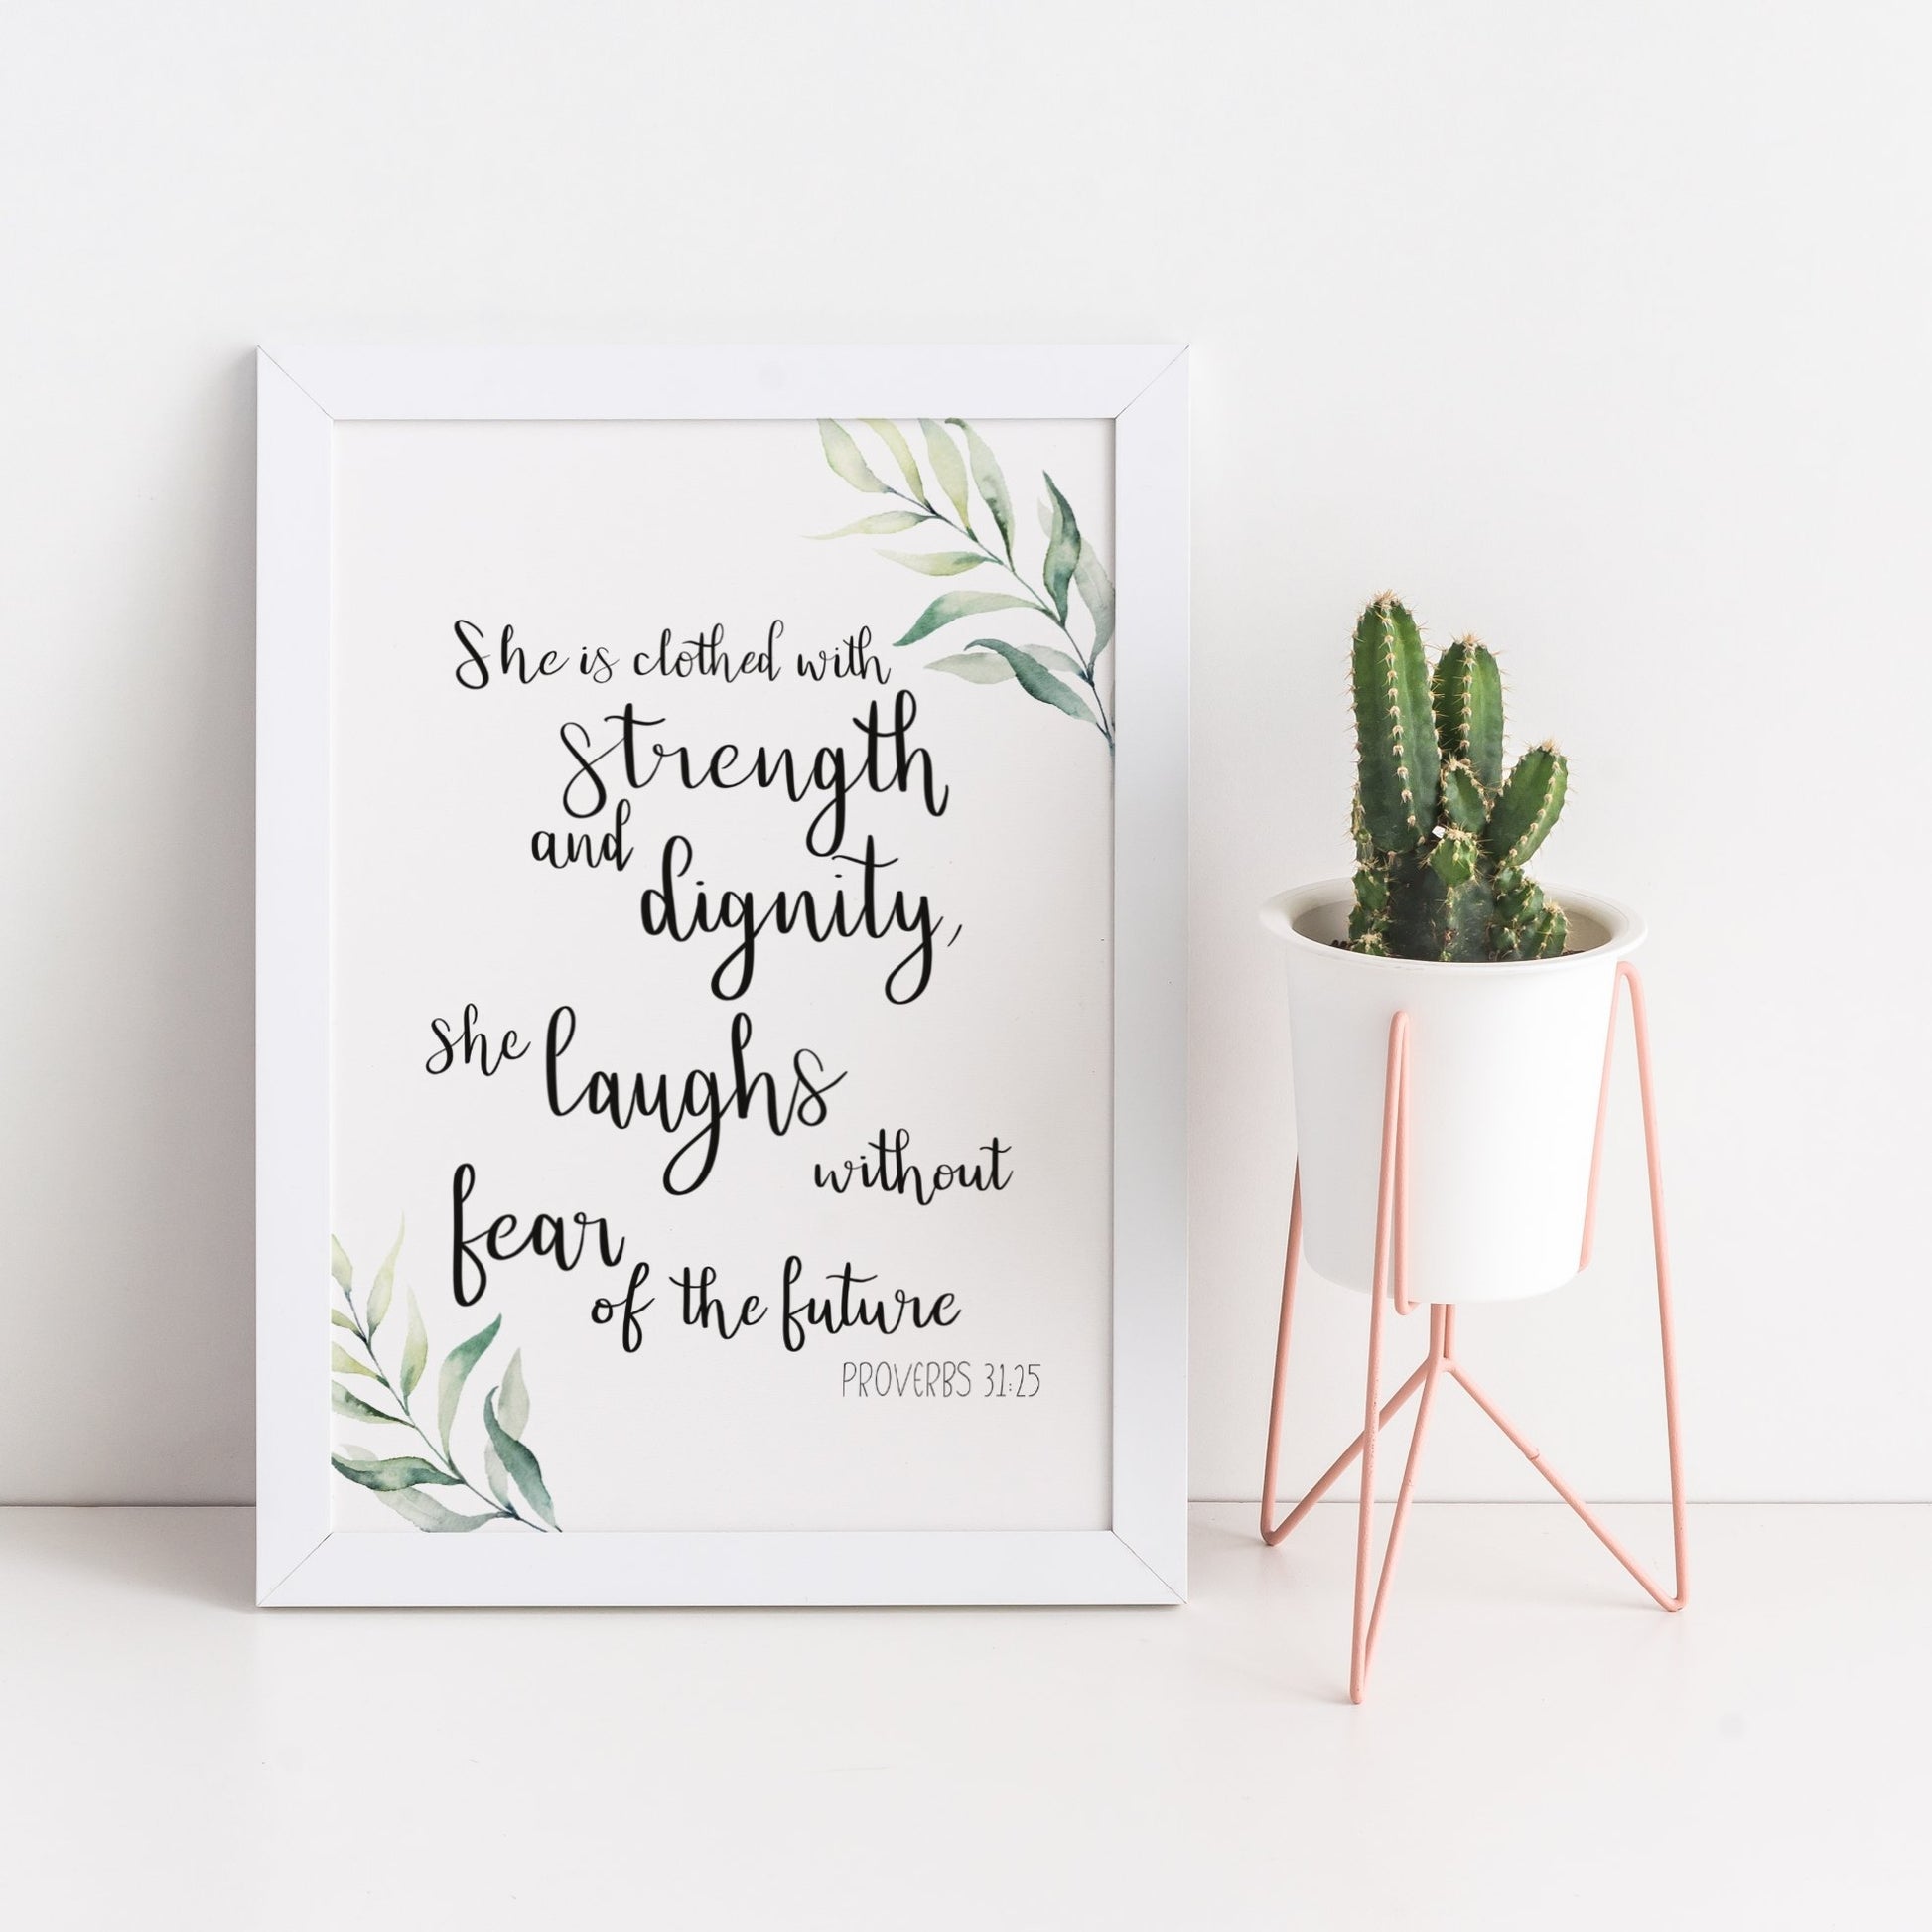 She clothed with strength and dignity watercolour print - Dolly and Fred Designs